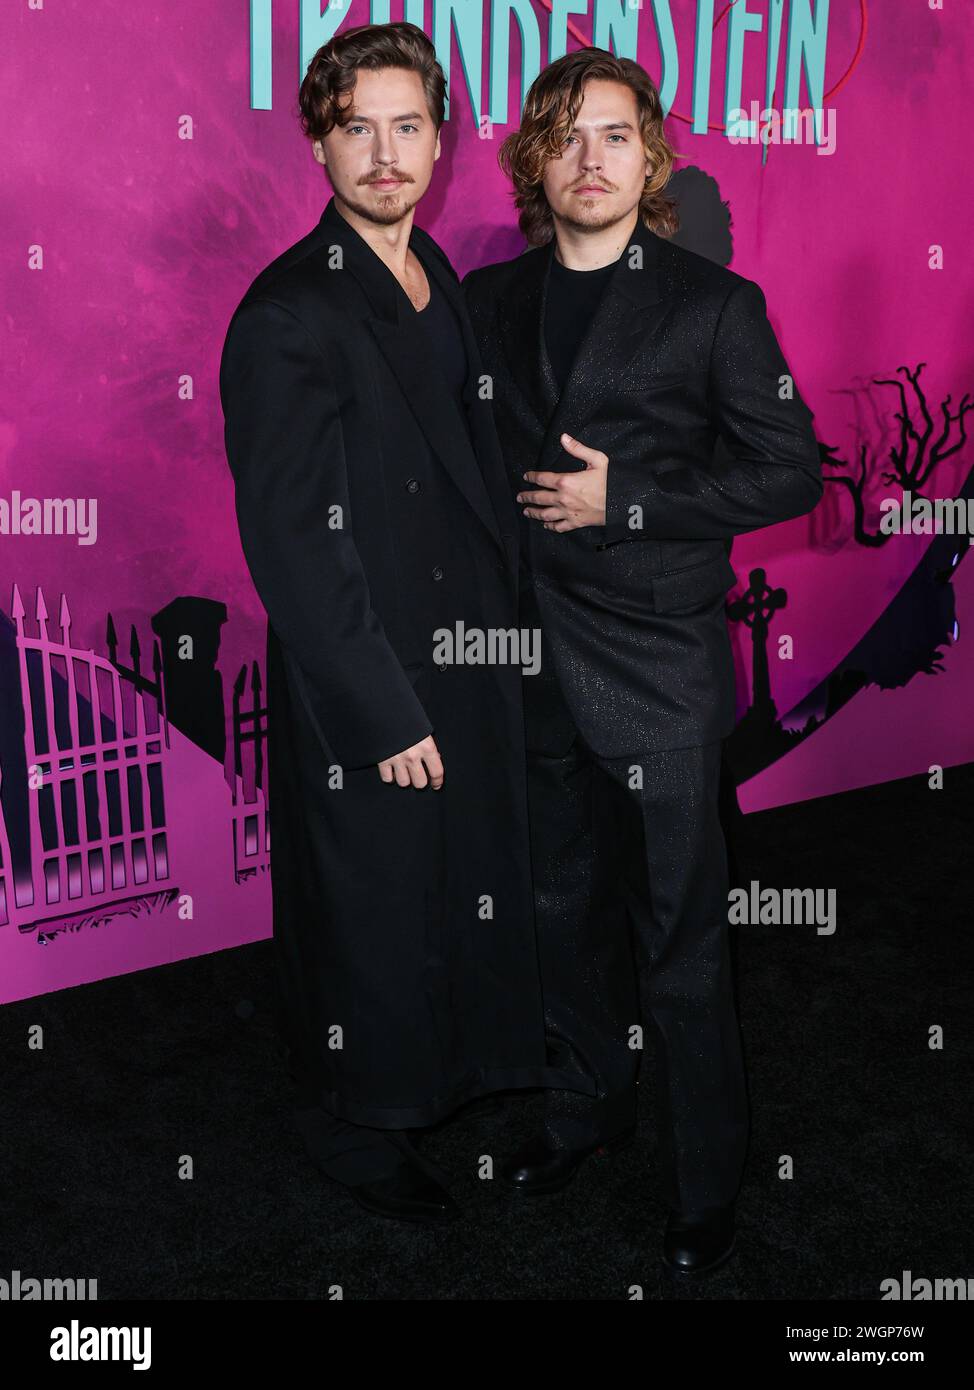 HOLLYWOOD, LOS ANGELES, CALIFORNIA, USA - FEBRUARY 05: Cole Sprouse and brother Dylan Sprouse arrive at the Los Angeles Special Screening Of Focus Features' 'Lisa Frankenstein' held at the Hollywood Athletic Club on February 5, 2024 in Hollywood, Los Angeles, California, United States. (Photo by Xavier Collin/Image Press Agency) Stock Photo